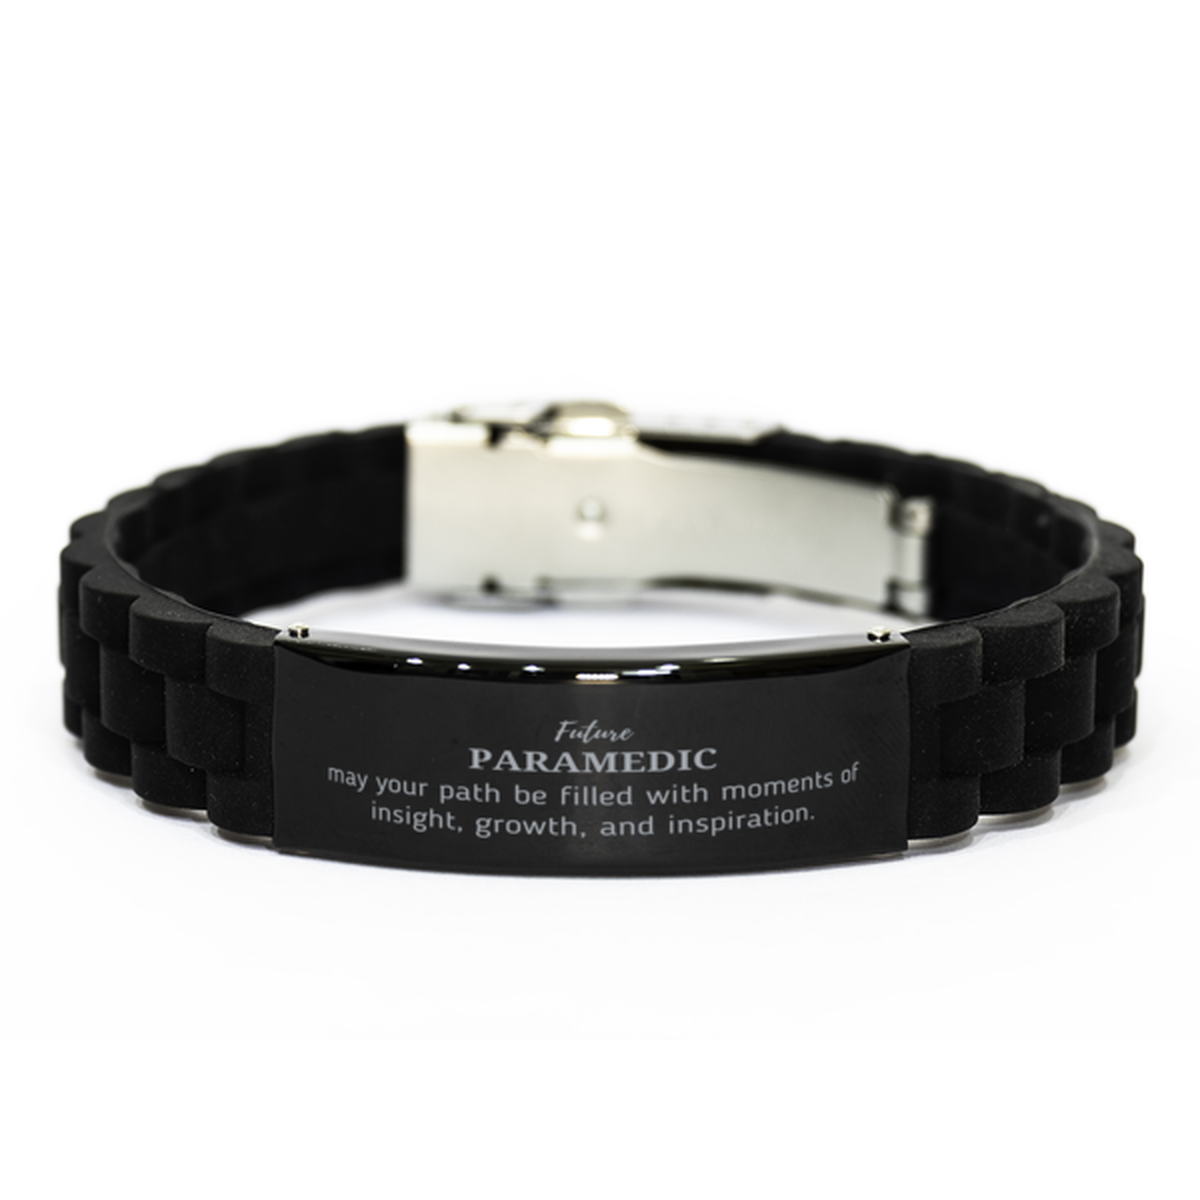 Future Paramedic Gifts, May your path be filled with moments of insight, Graduation Gifts for New Paramedic, Christmas Unique Black Glidelock Clasp Bracelet For Men, Women, Friends